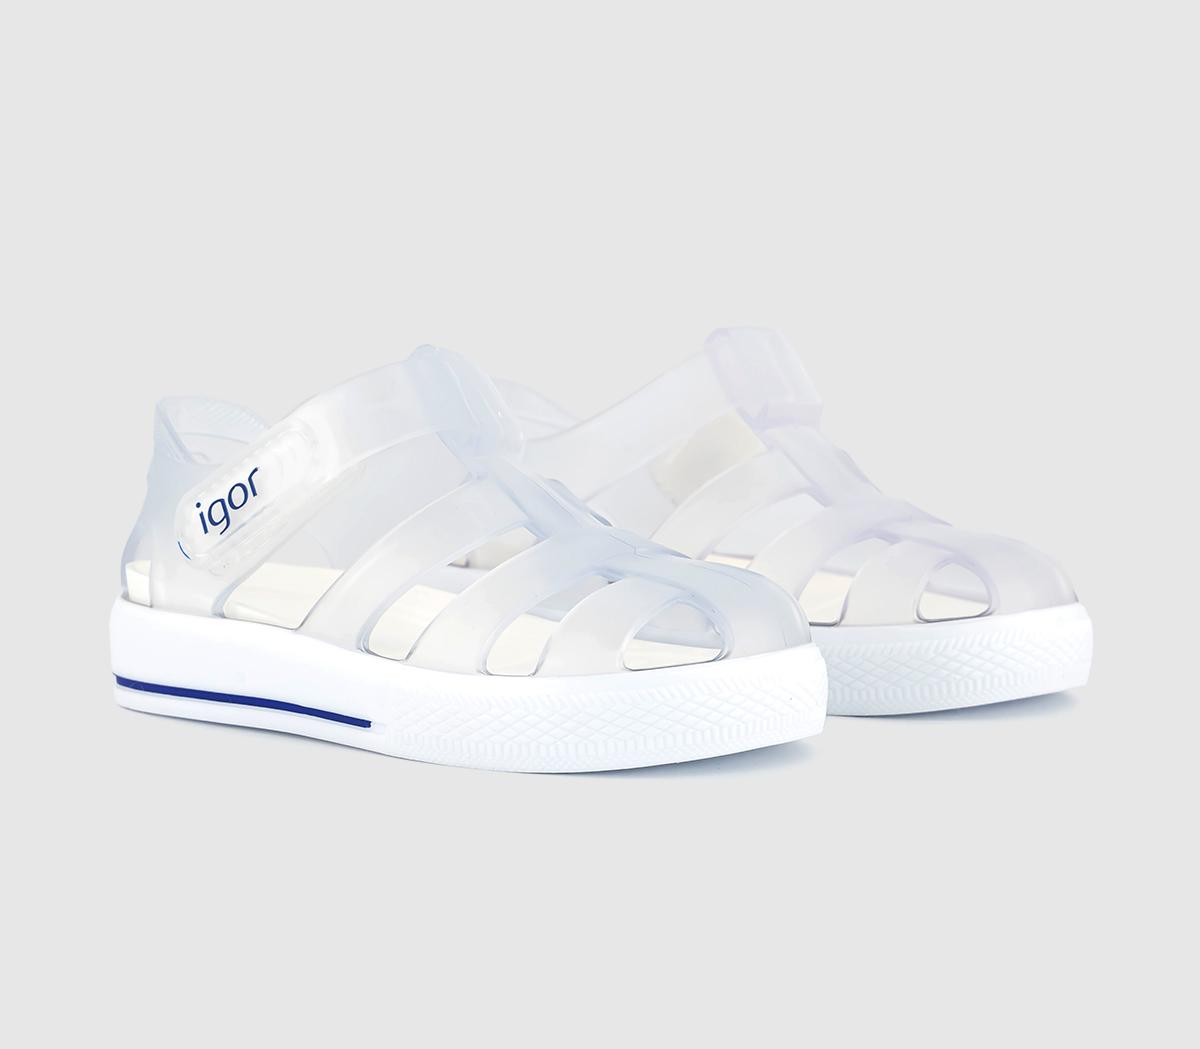 Igor Kids Clear White Star Summer Sandals, Perfect For The Hot Sand Or Poolside, Size: 6 Infant